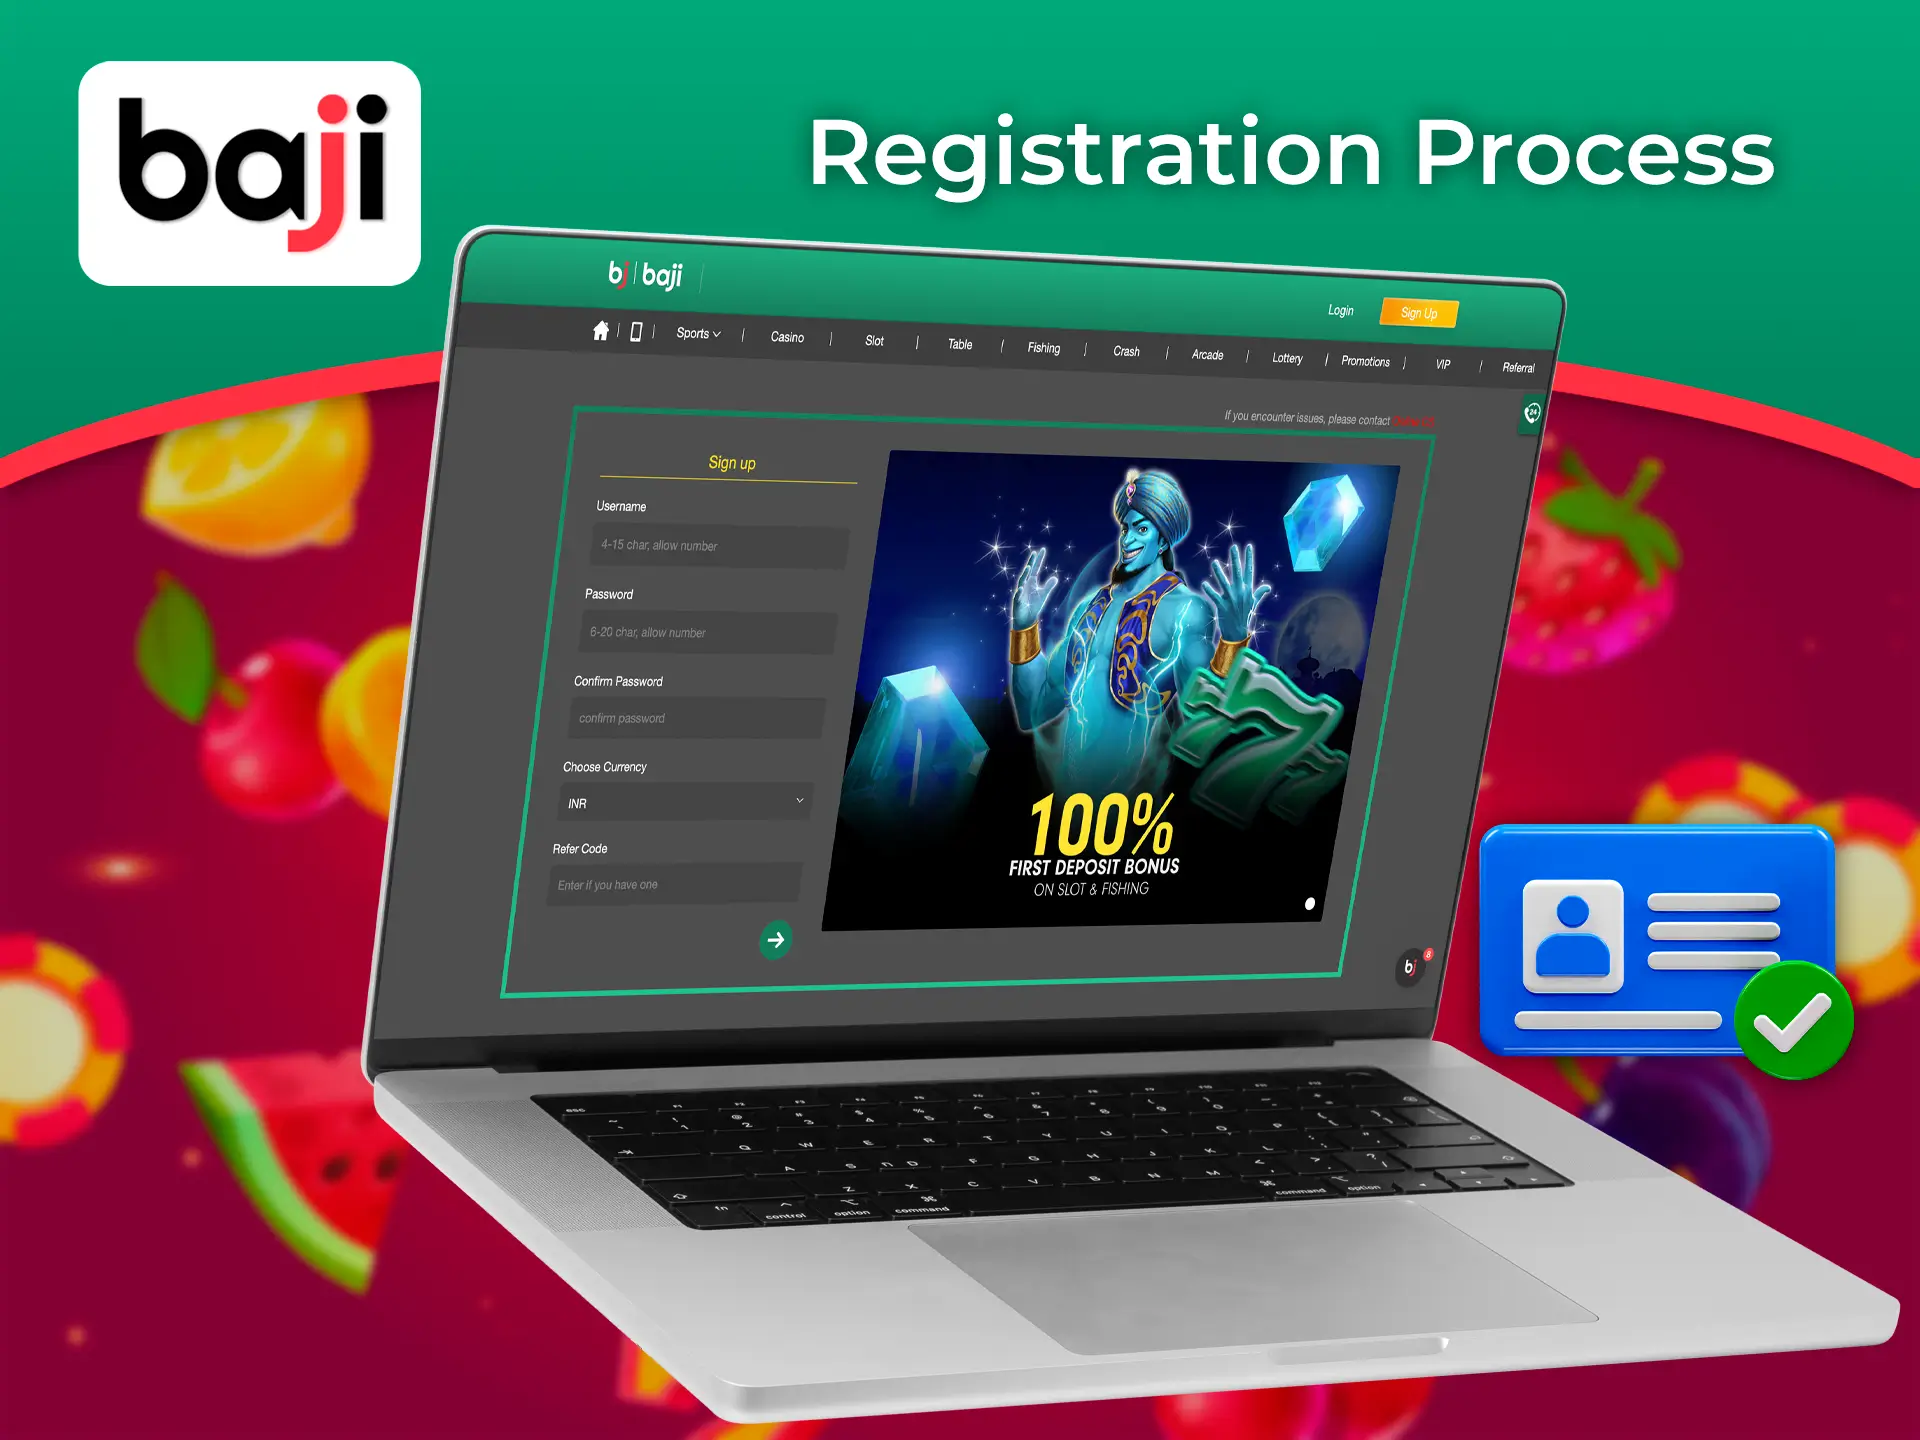 Complete a simple and straightforward registration on the Baji website to get full access to the casino and betting features.